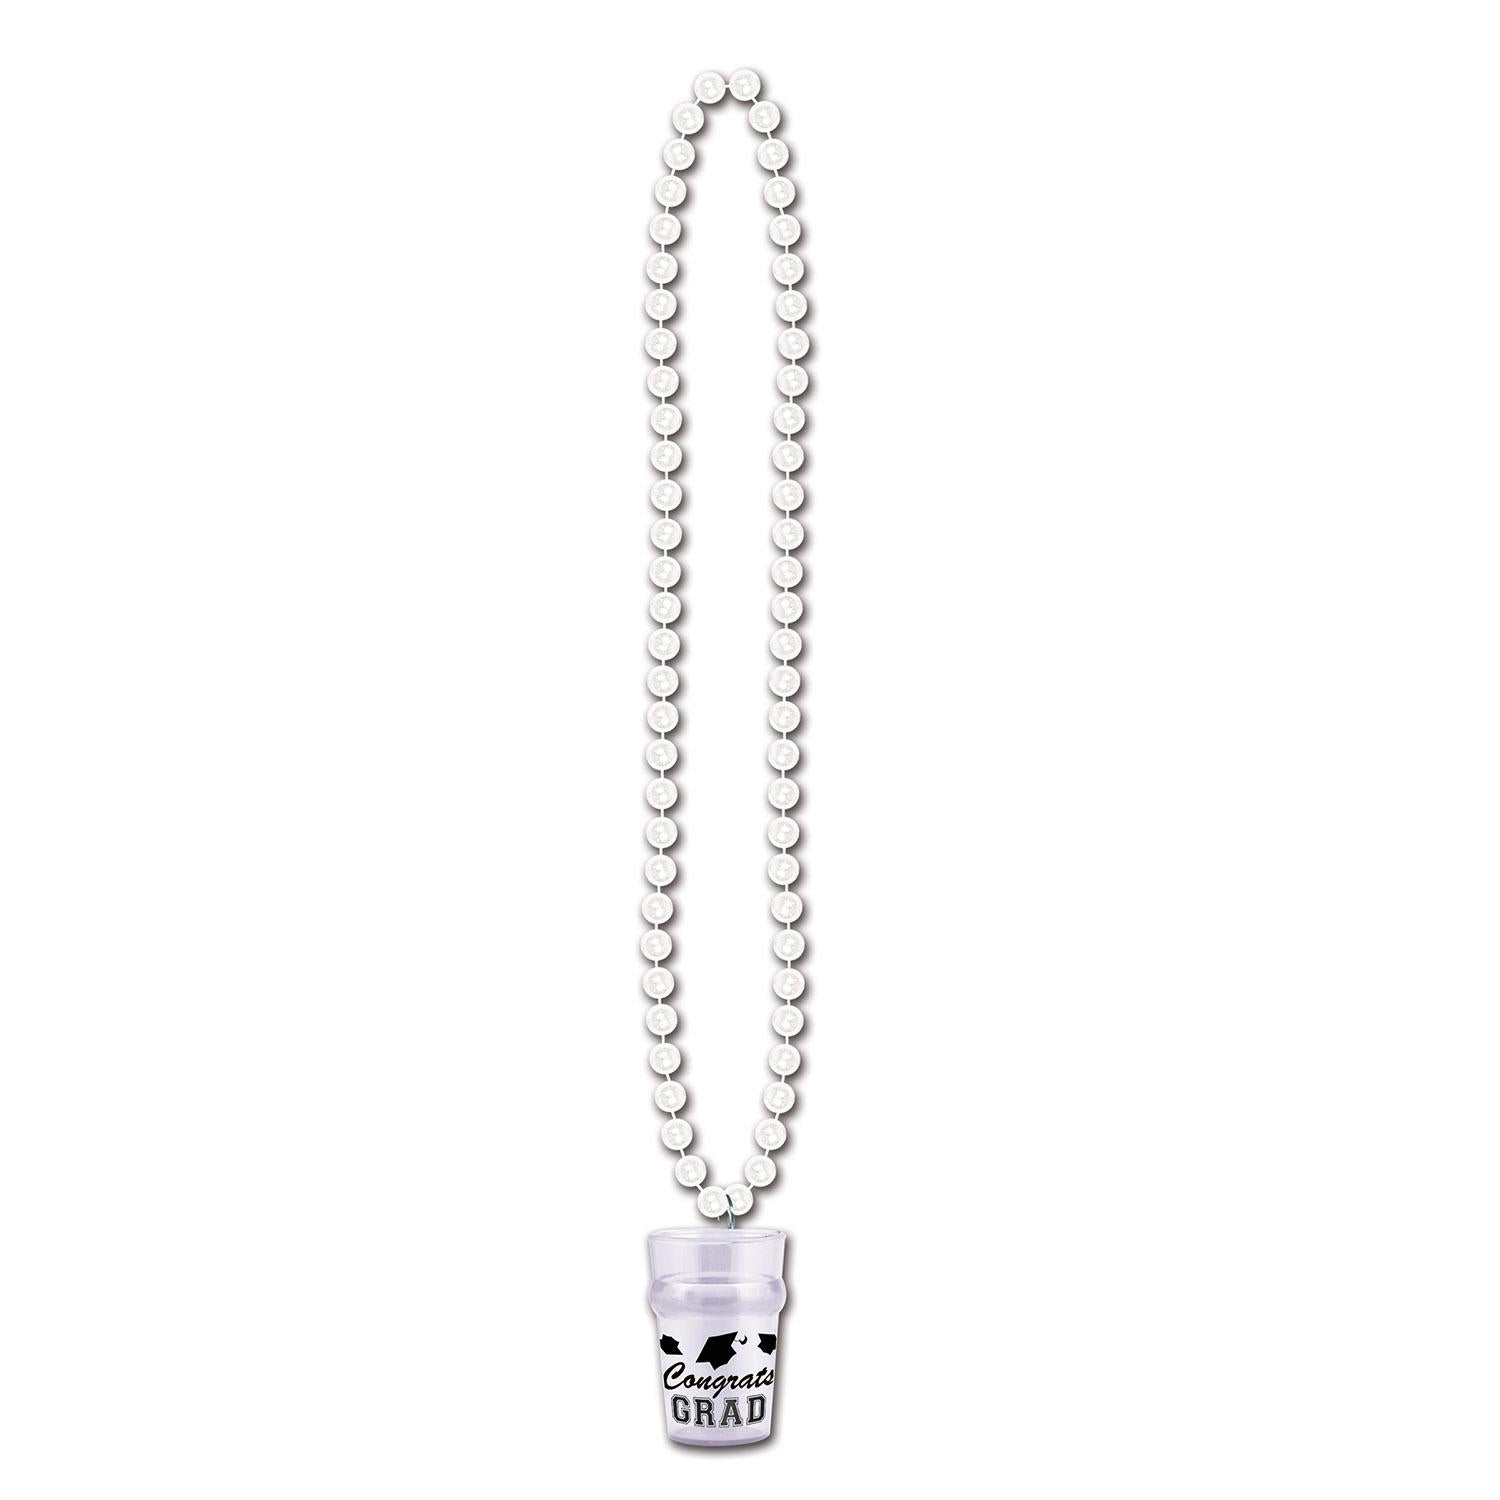 Beistle Graduation Party Bead Necklaces with Grad Glass - White